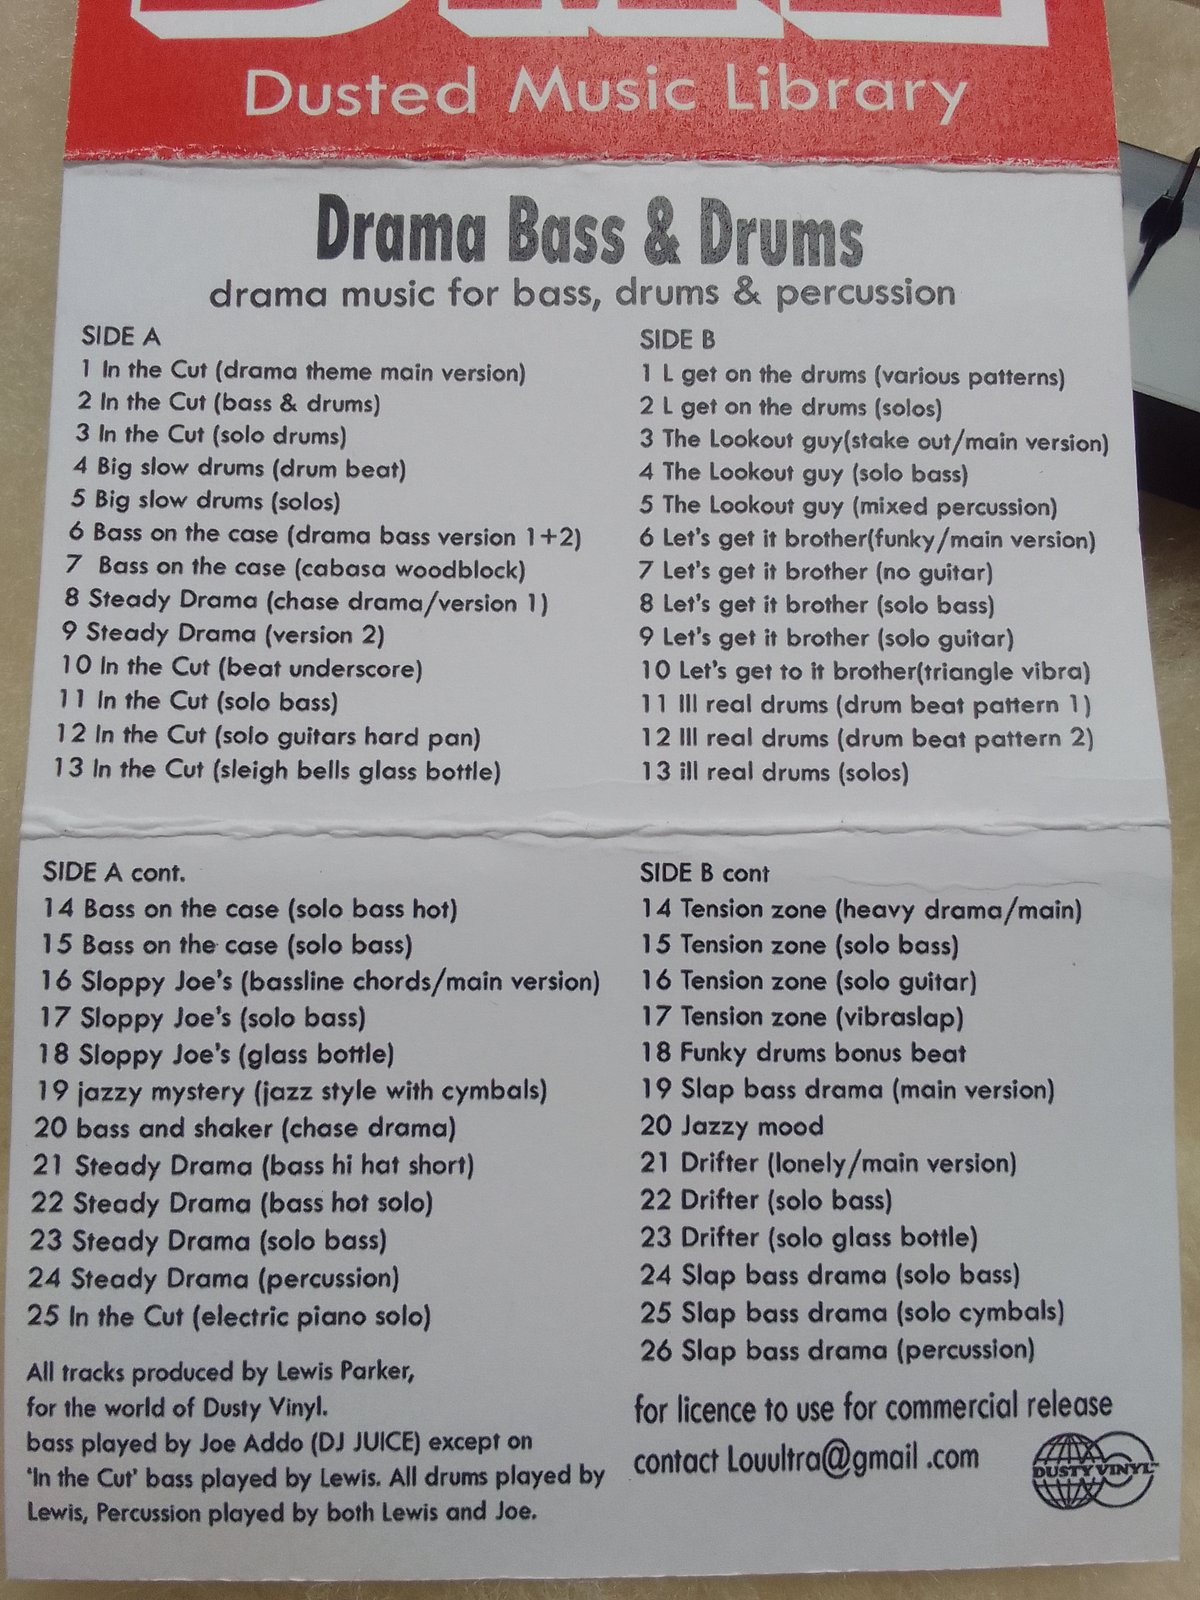 DML (Dusted Music Library) Vol 1 Drama Bass & Drums | World Of 